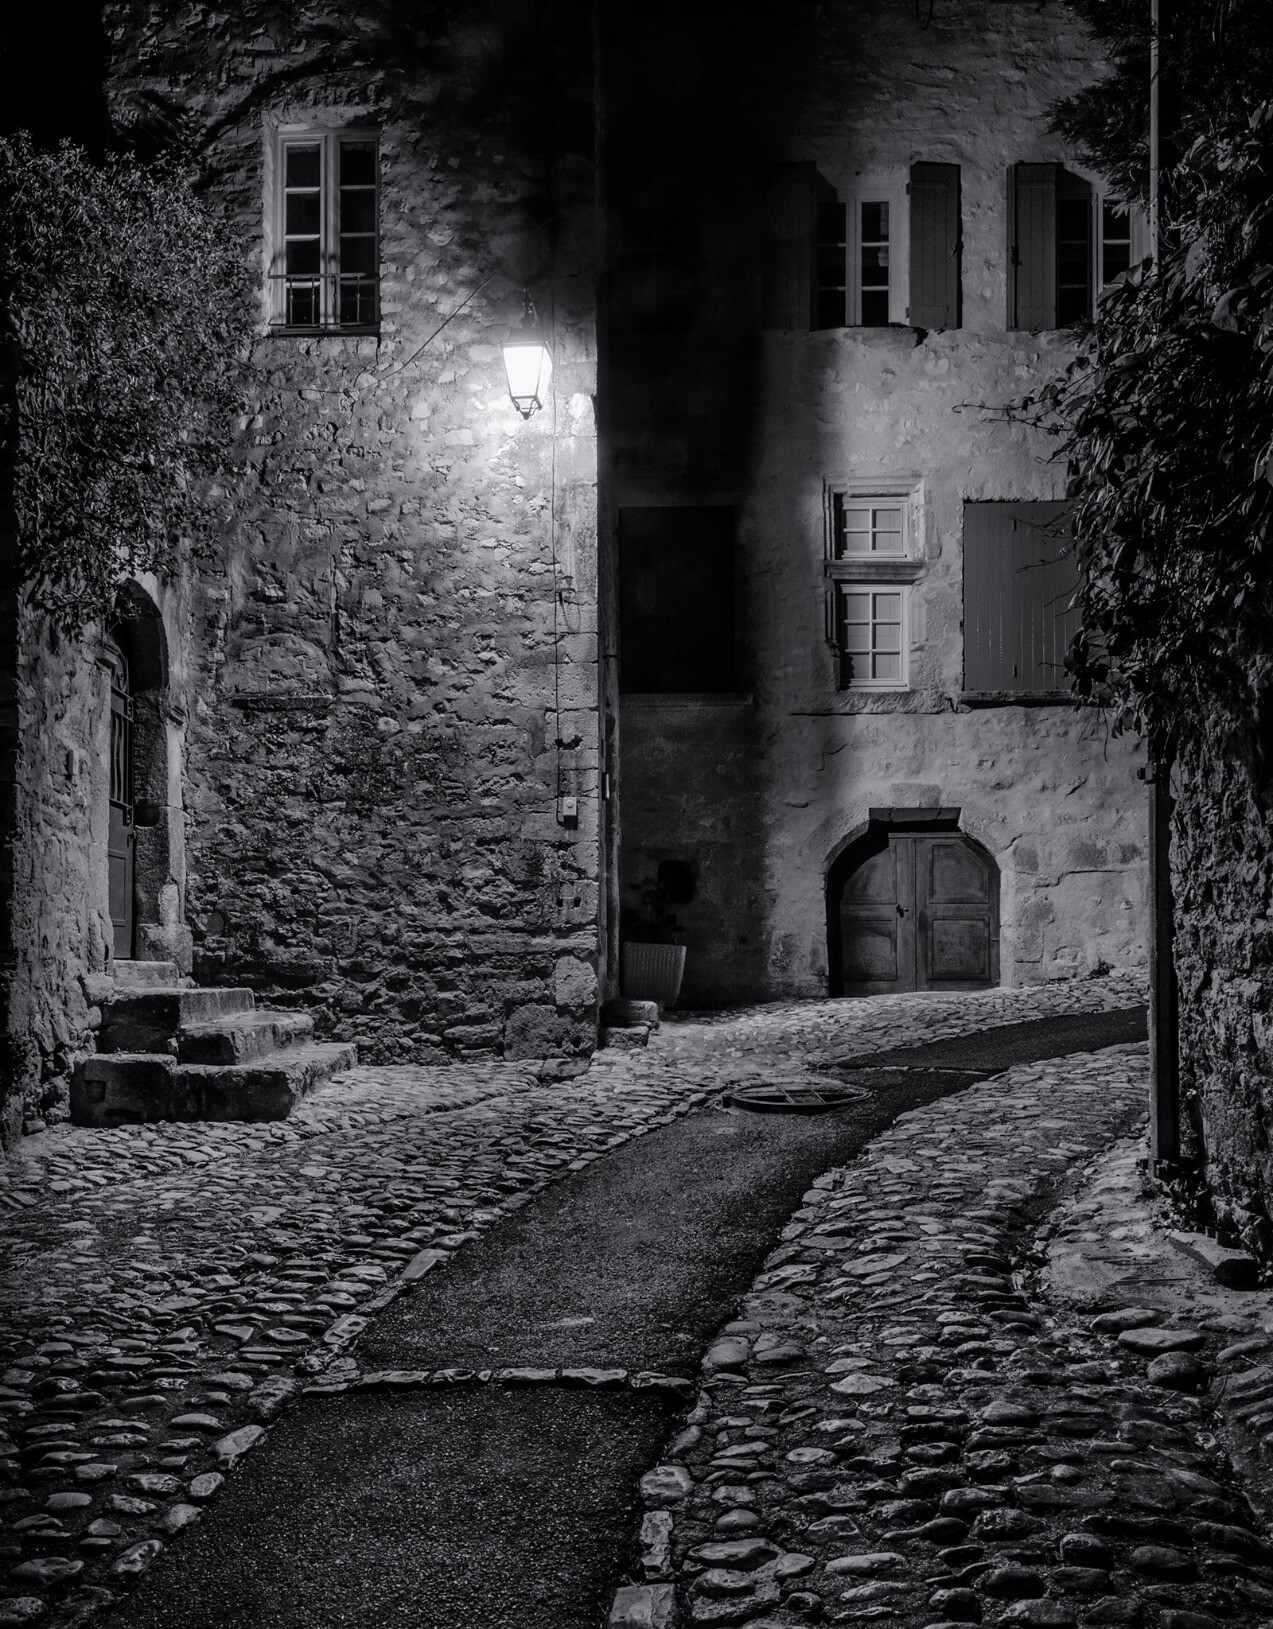 Path in the mediaeval town of Vaison-la-Romaine, France.